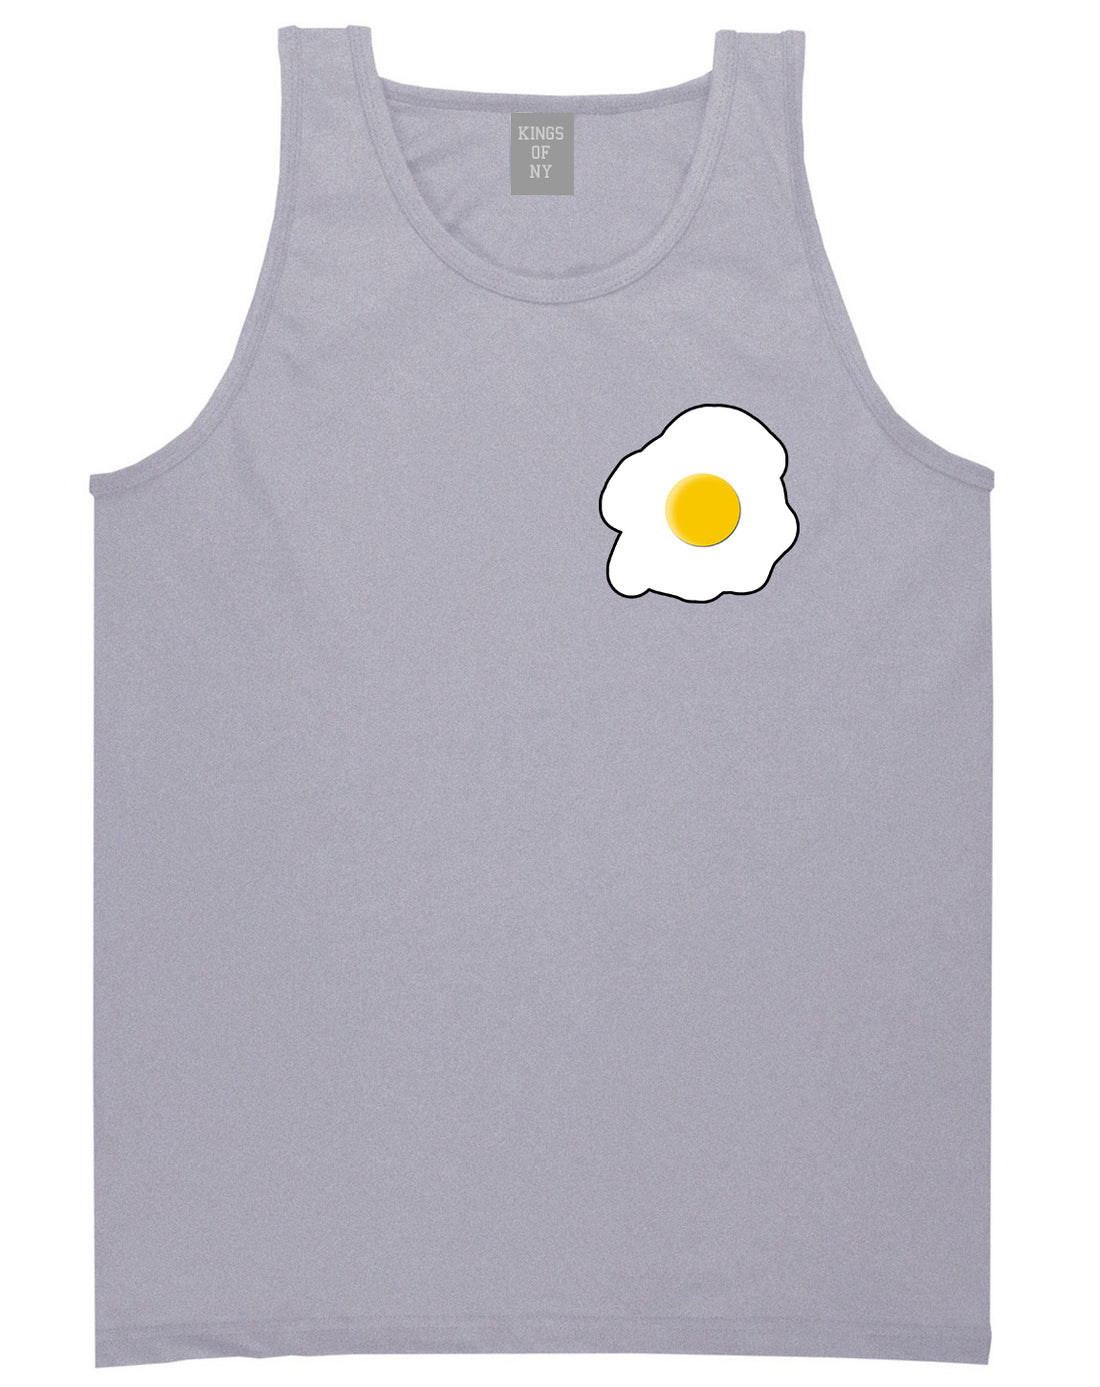 Fried Egg Breakfast Chest Mens Grey Tank Top Shirt by KINGS OF NY